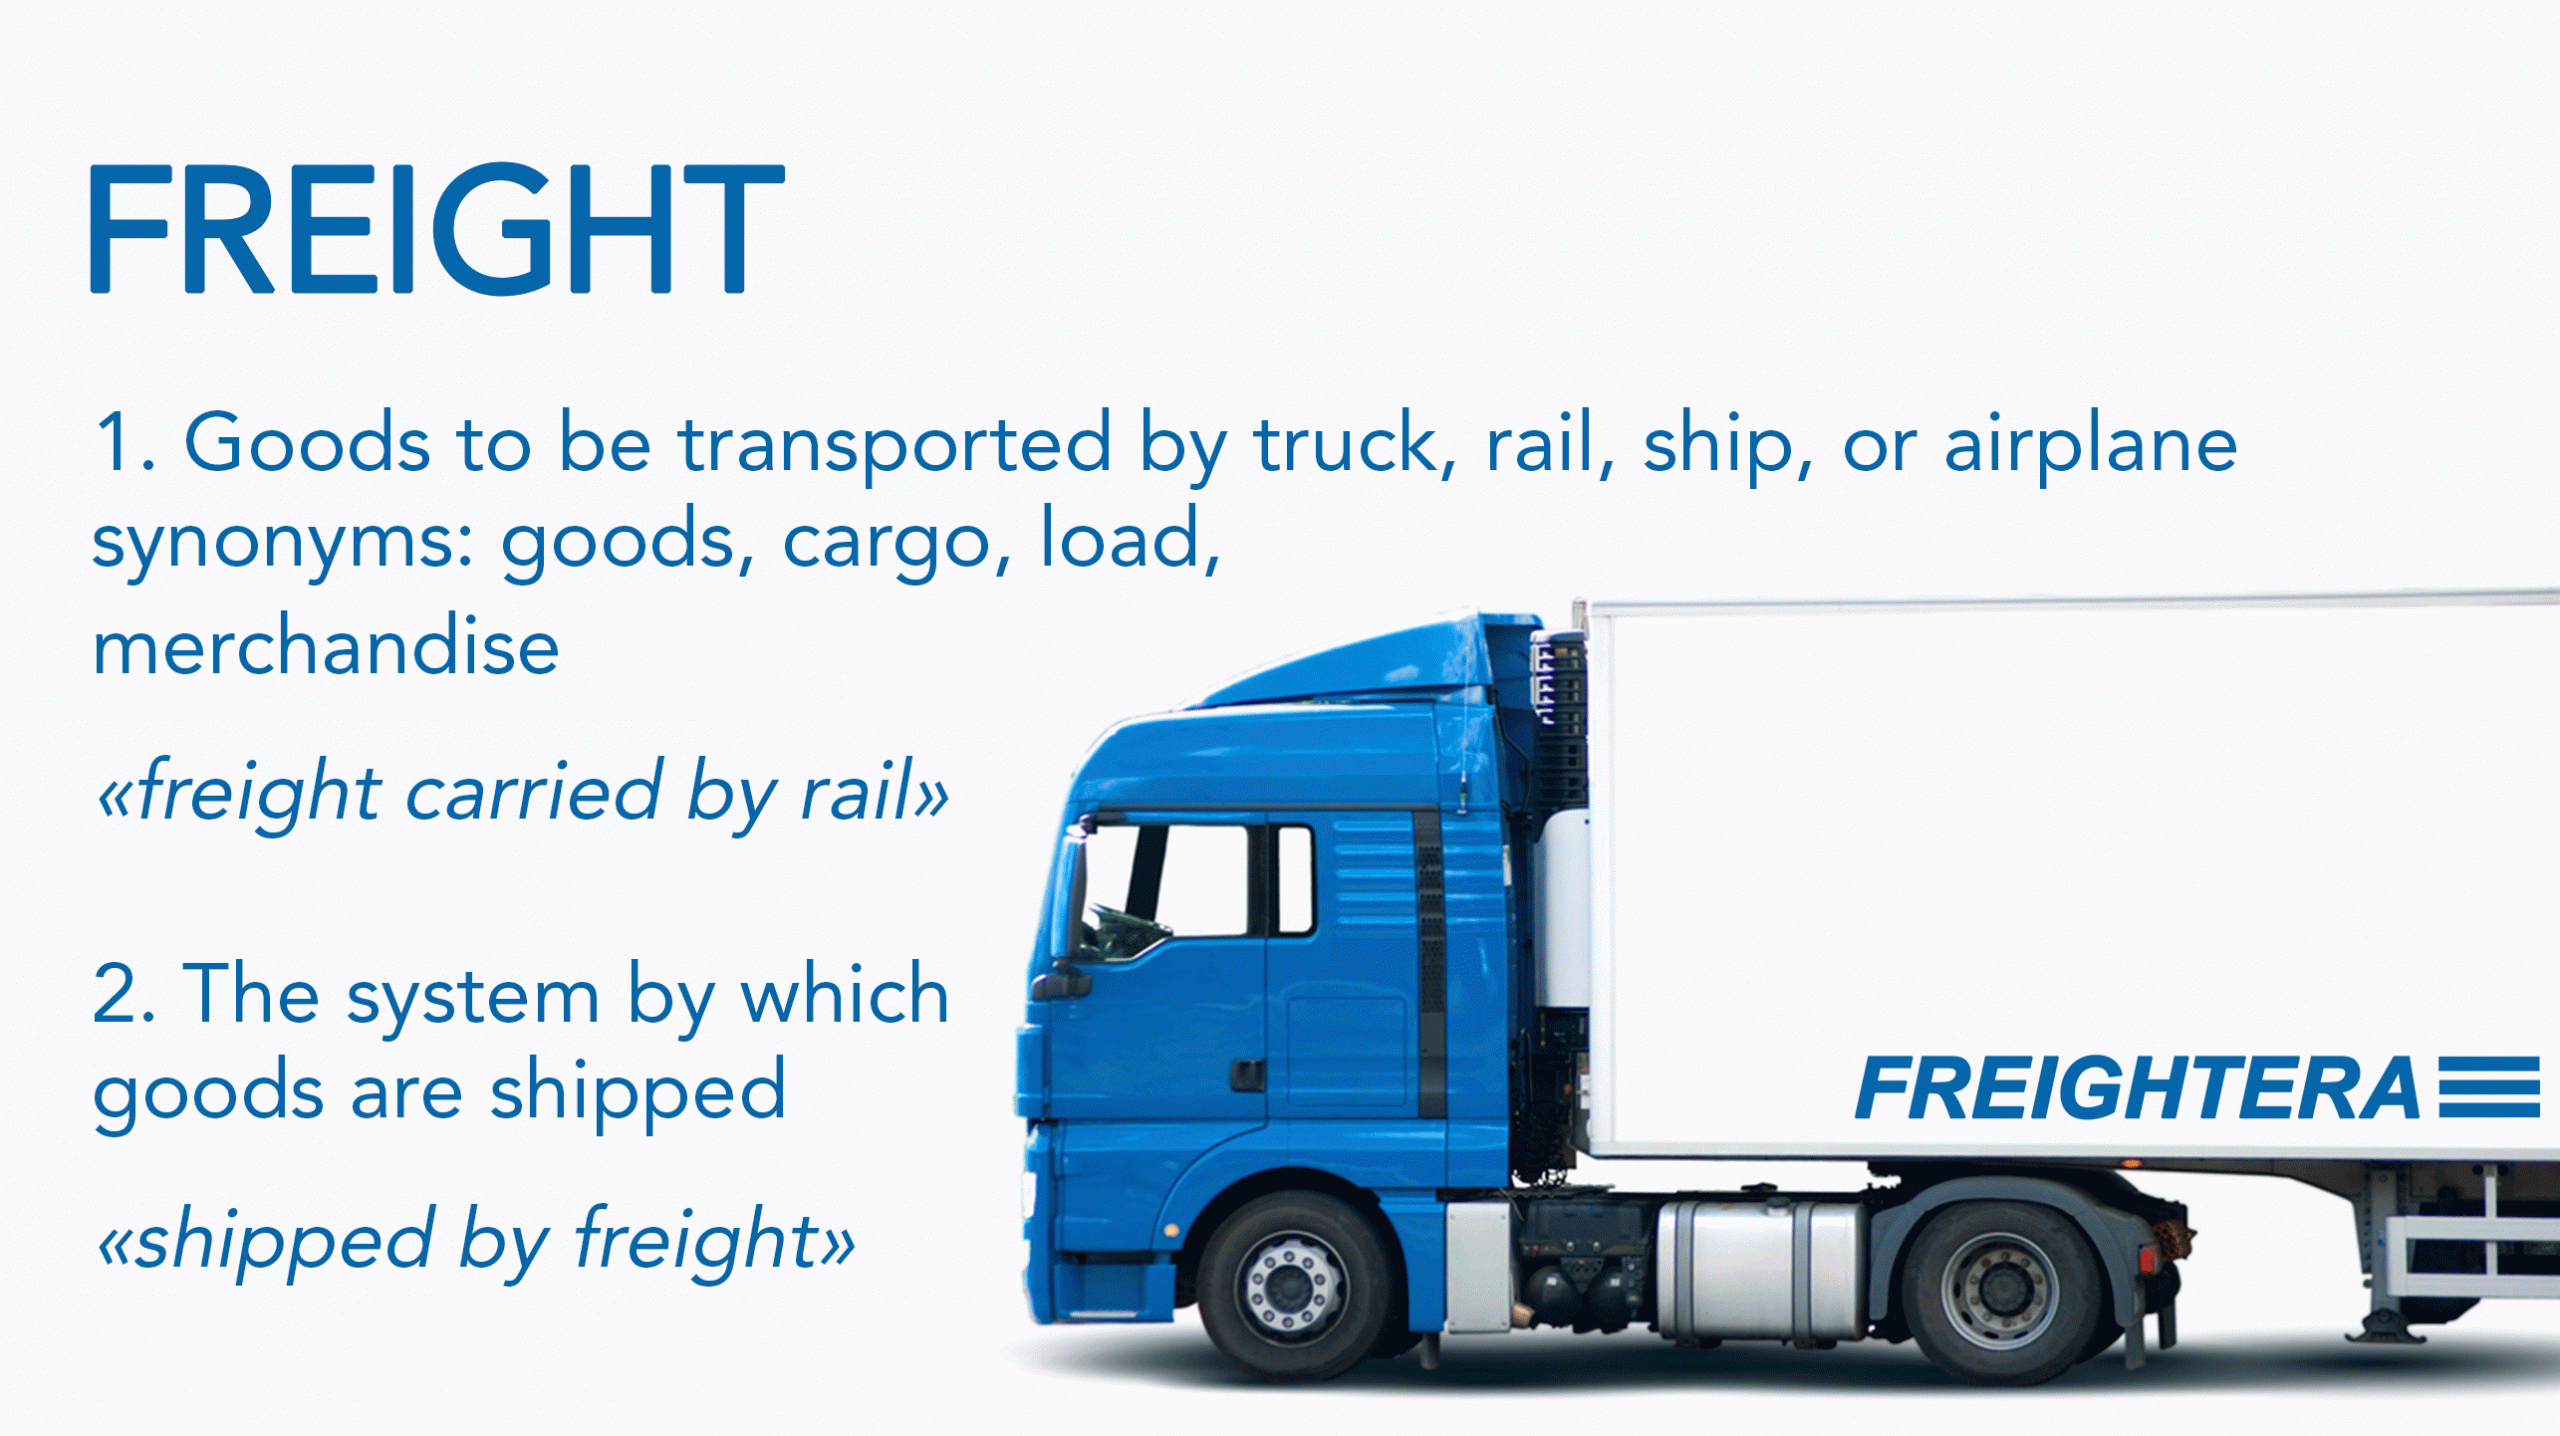 FREIGHT image definition Freightera